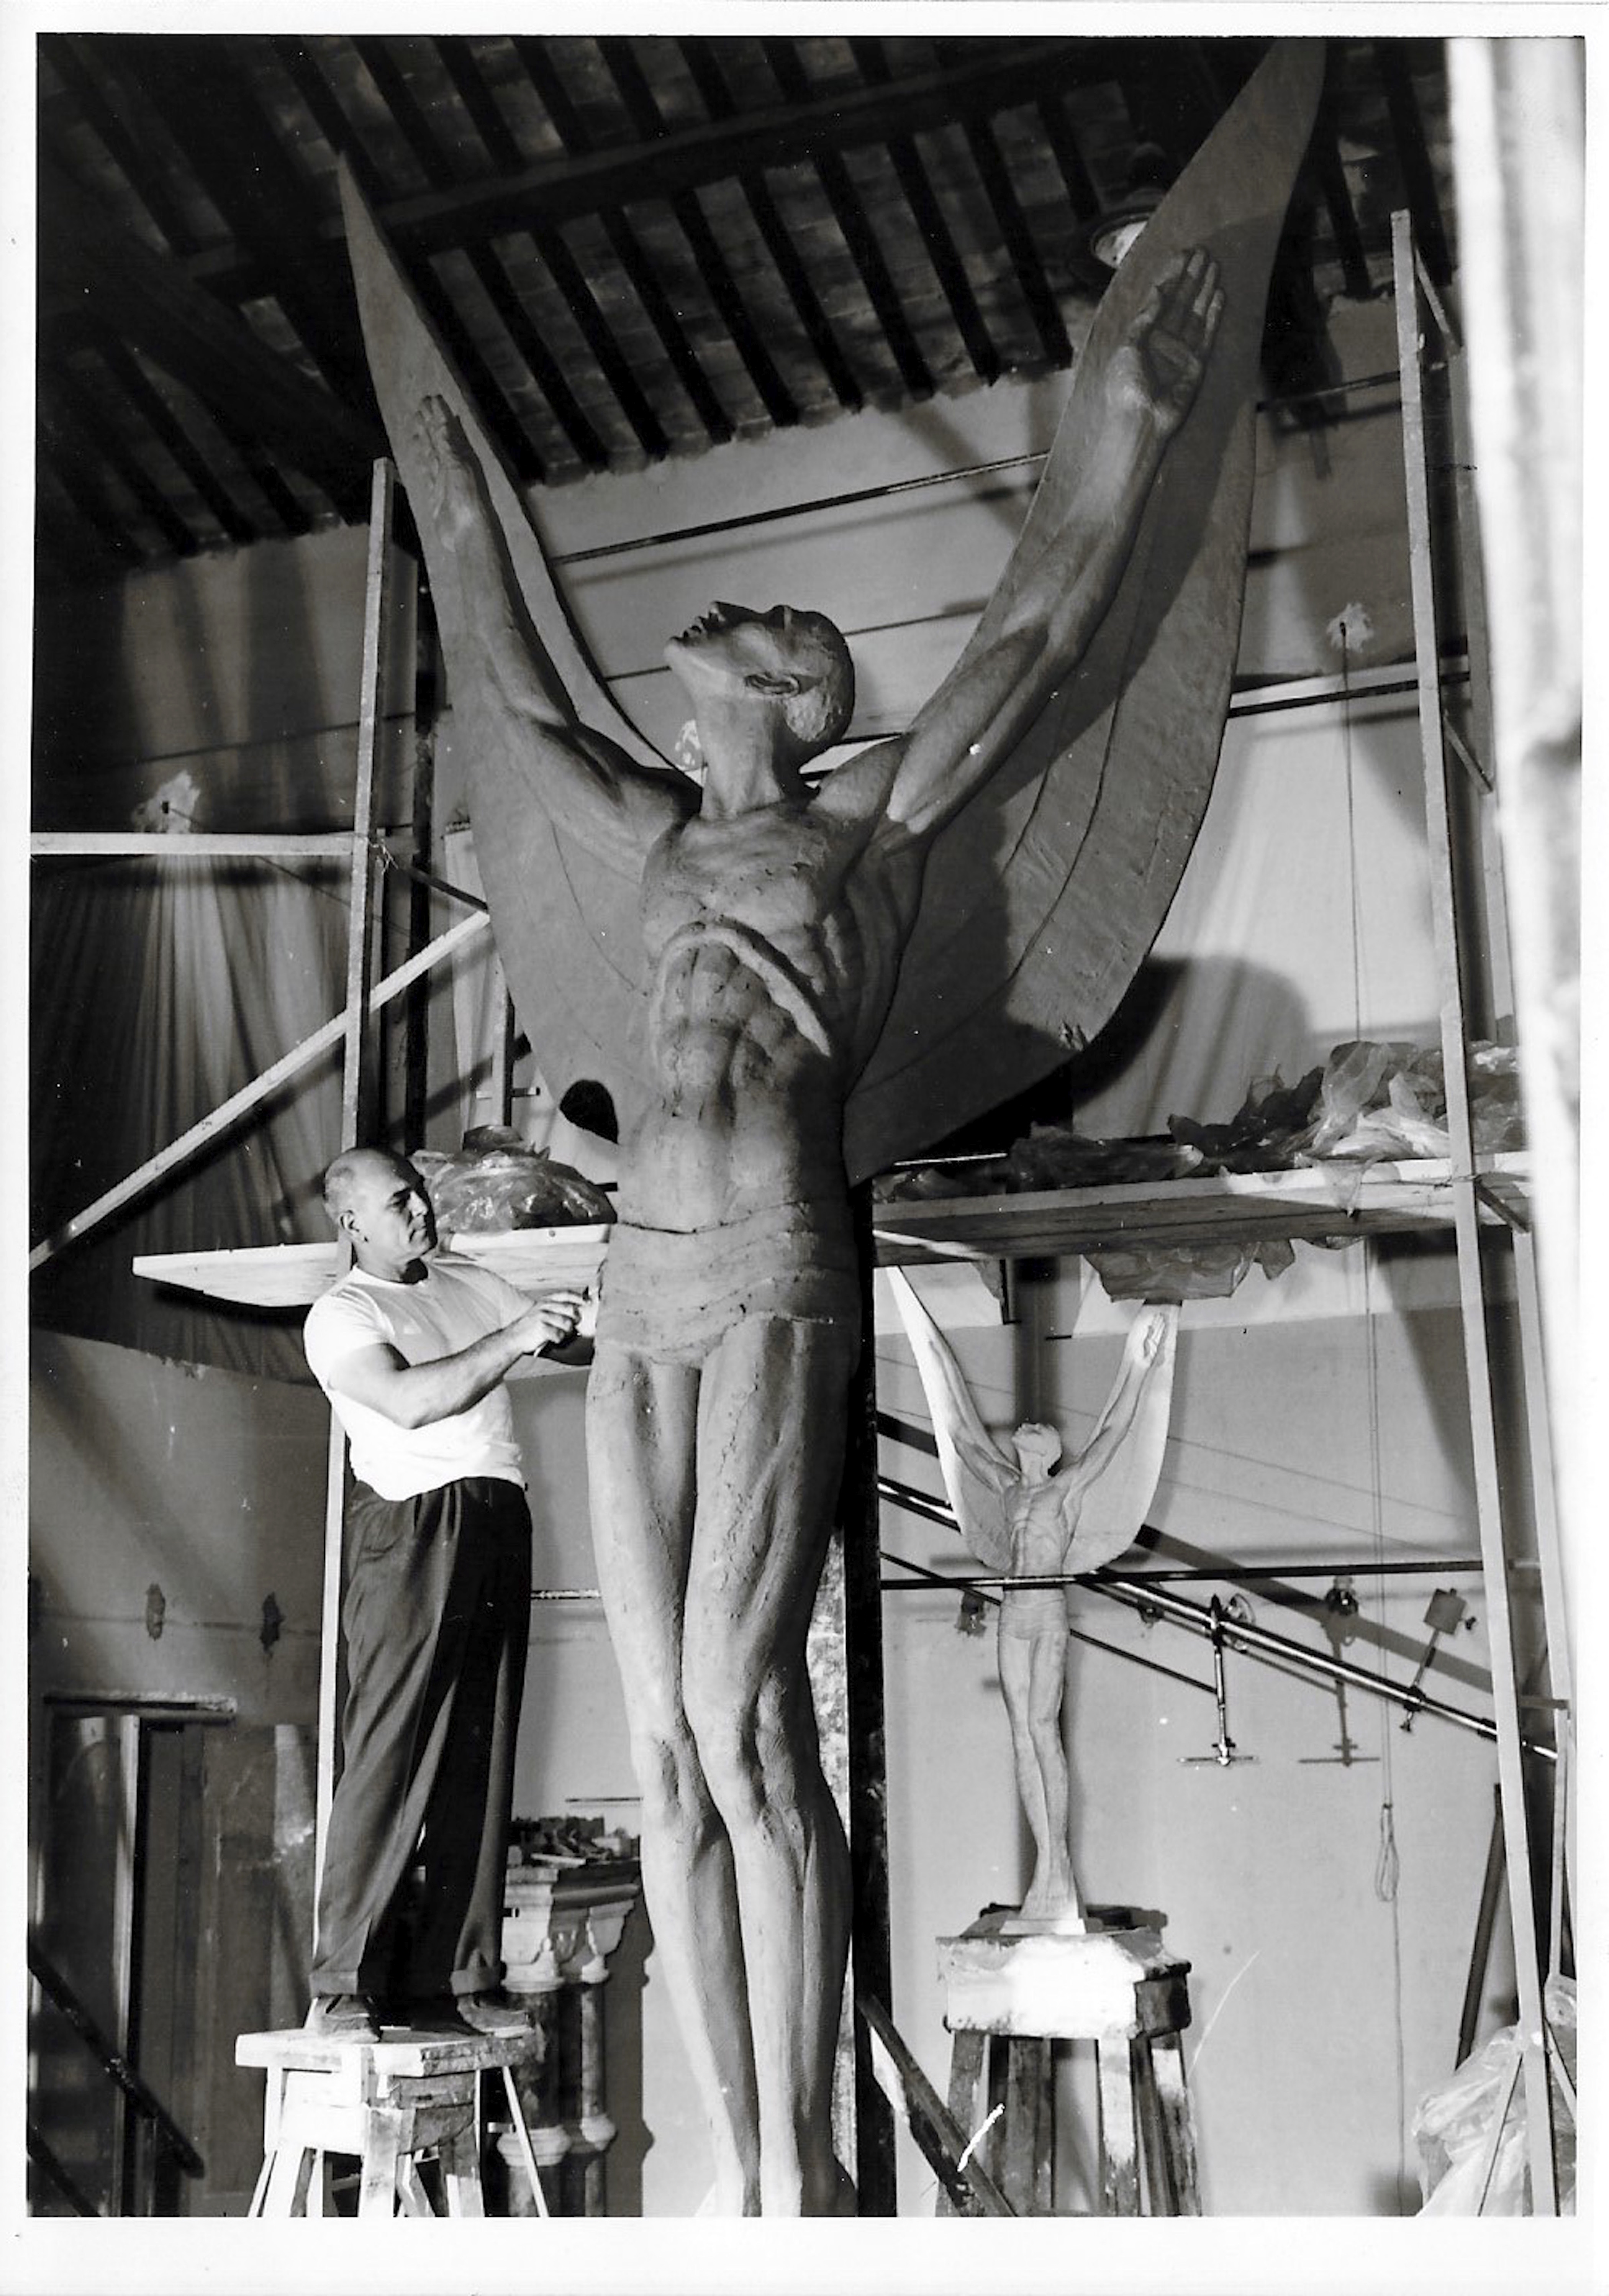 Charles Umlauf creates Spirit of Flight in 1960 which now welcomes visitors at Dallas Love Field.